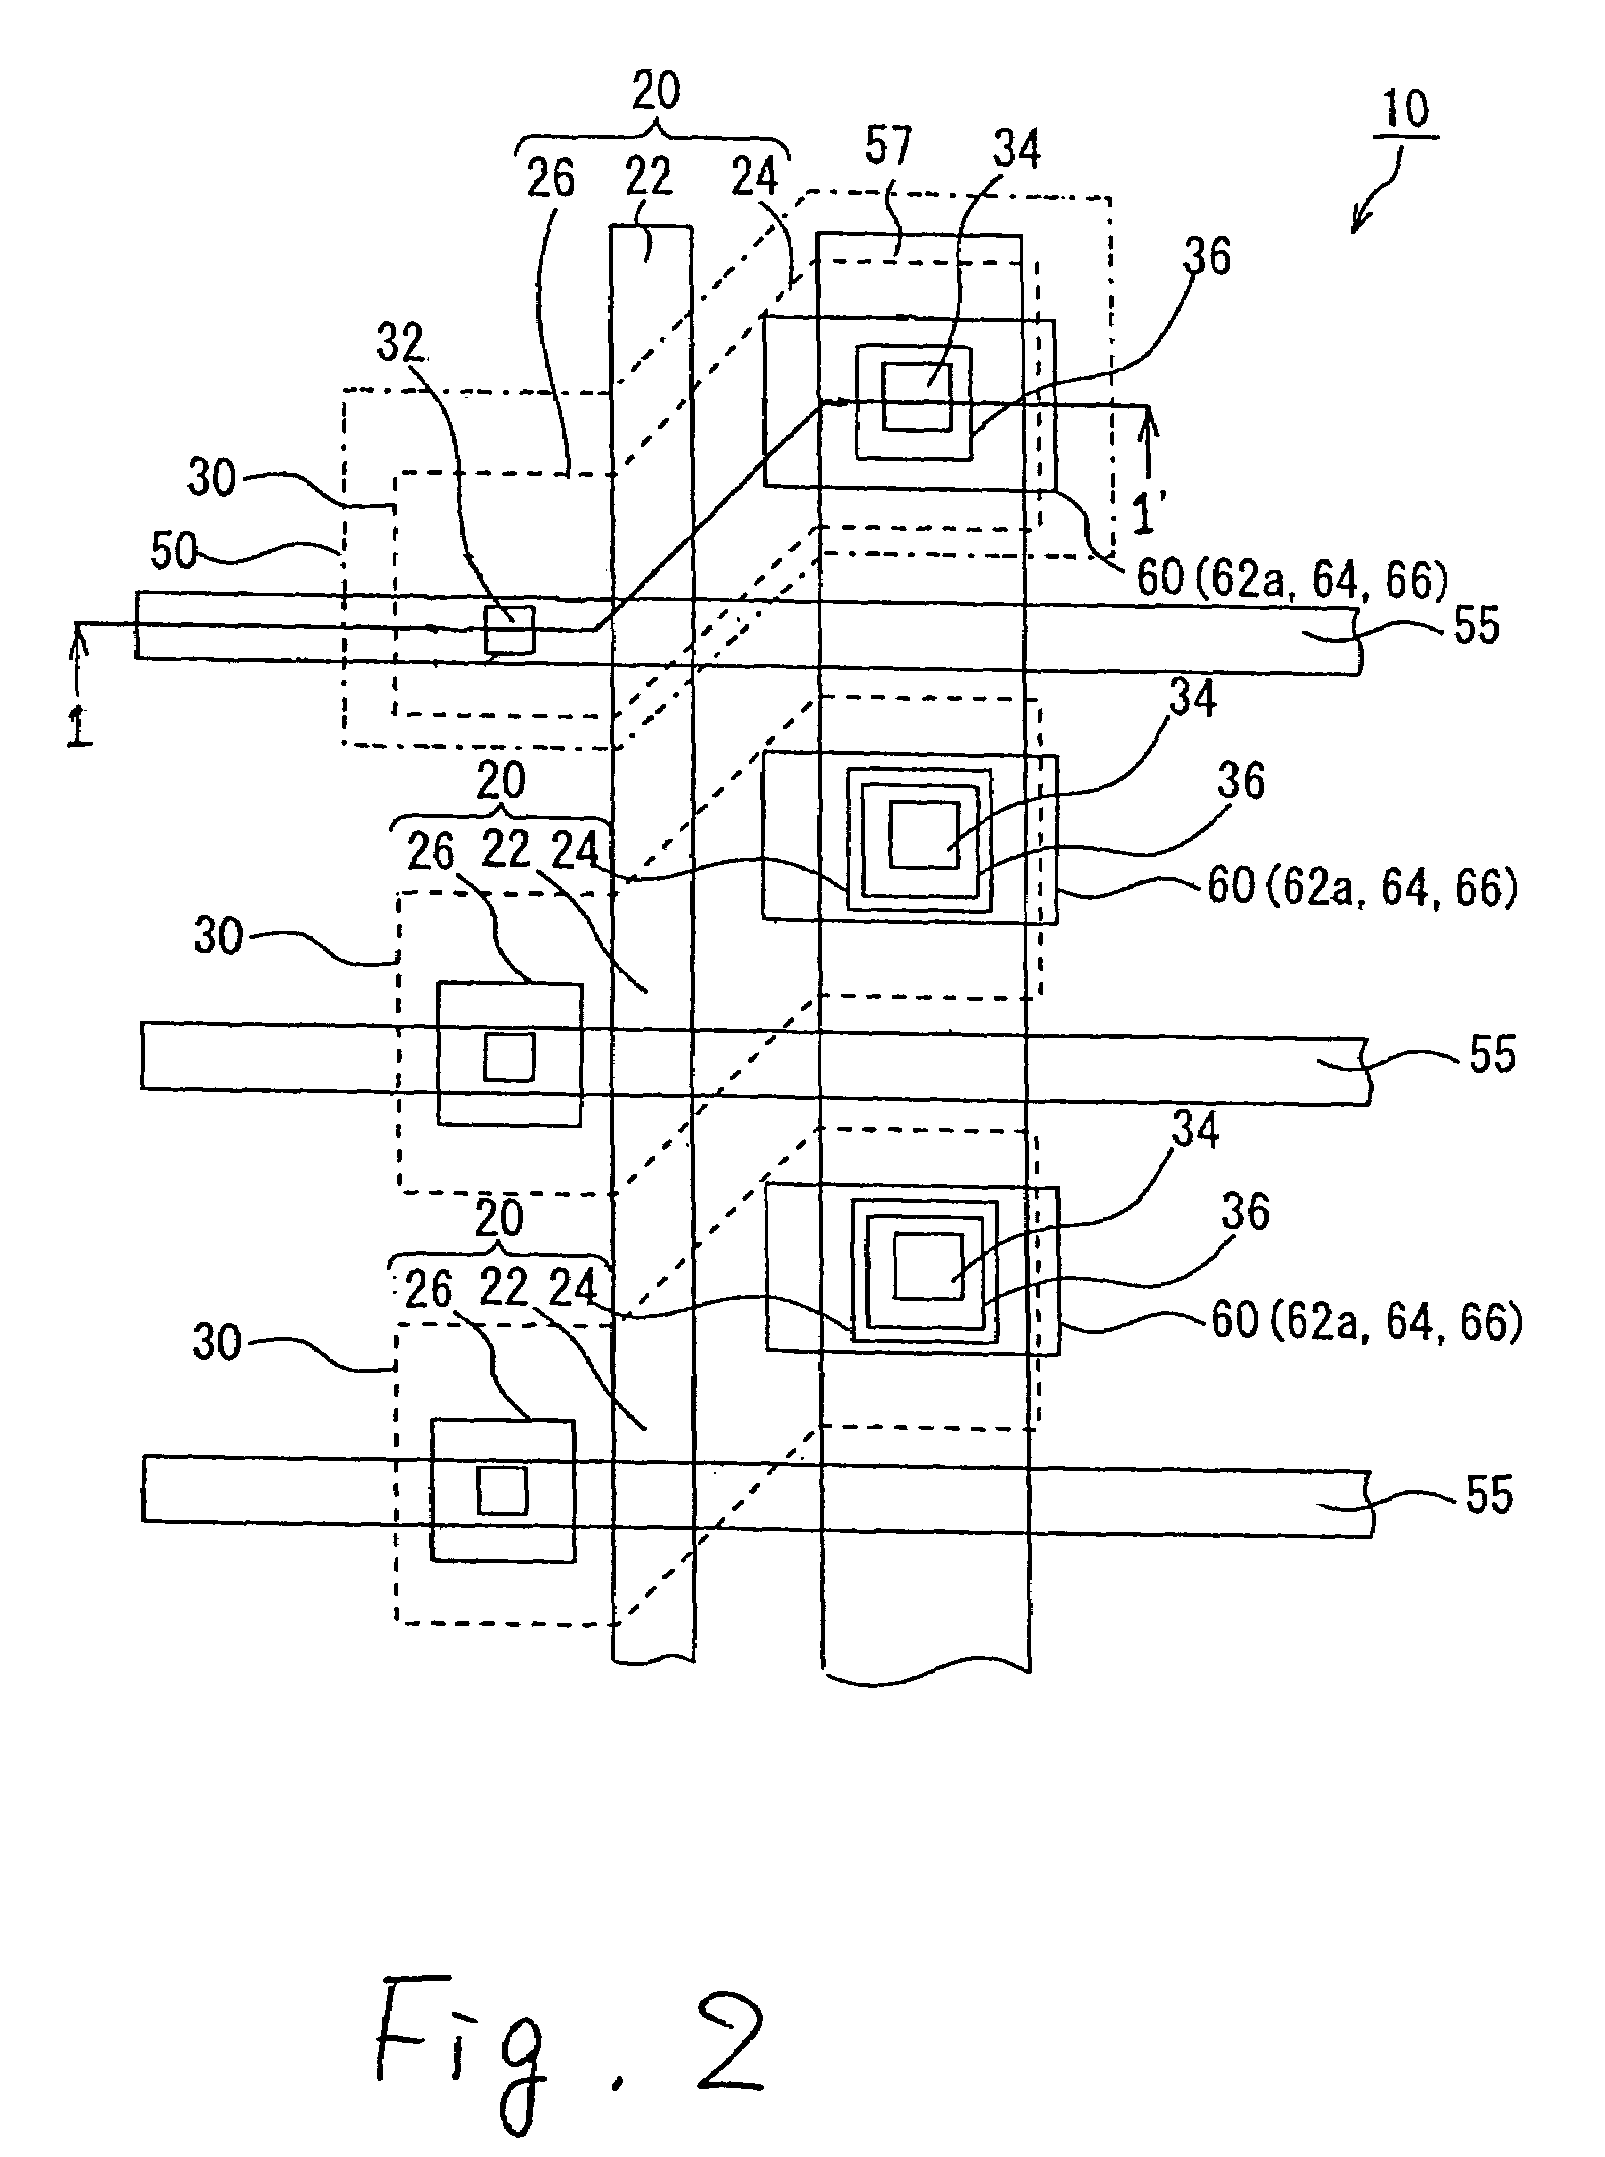 Ferroelectric capacitor and semiconductor device having a ferroelectric capacitor